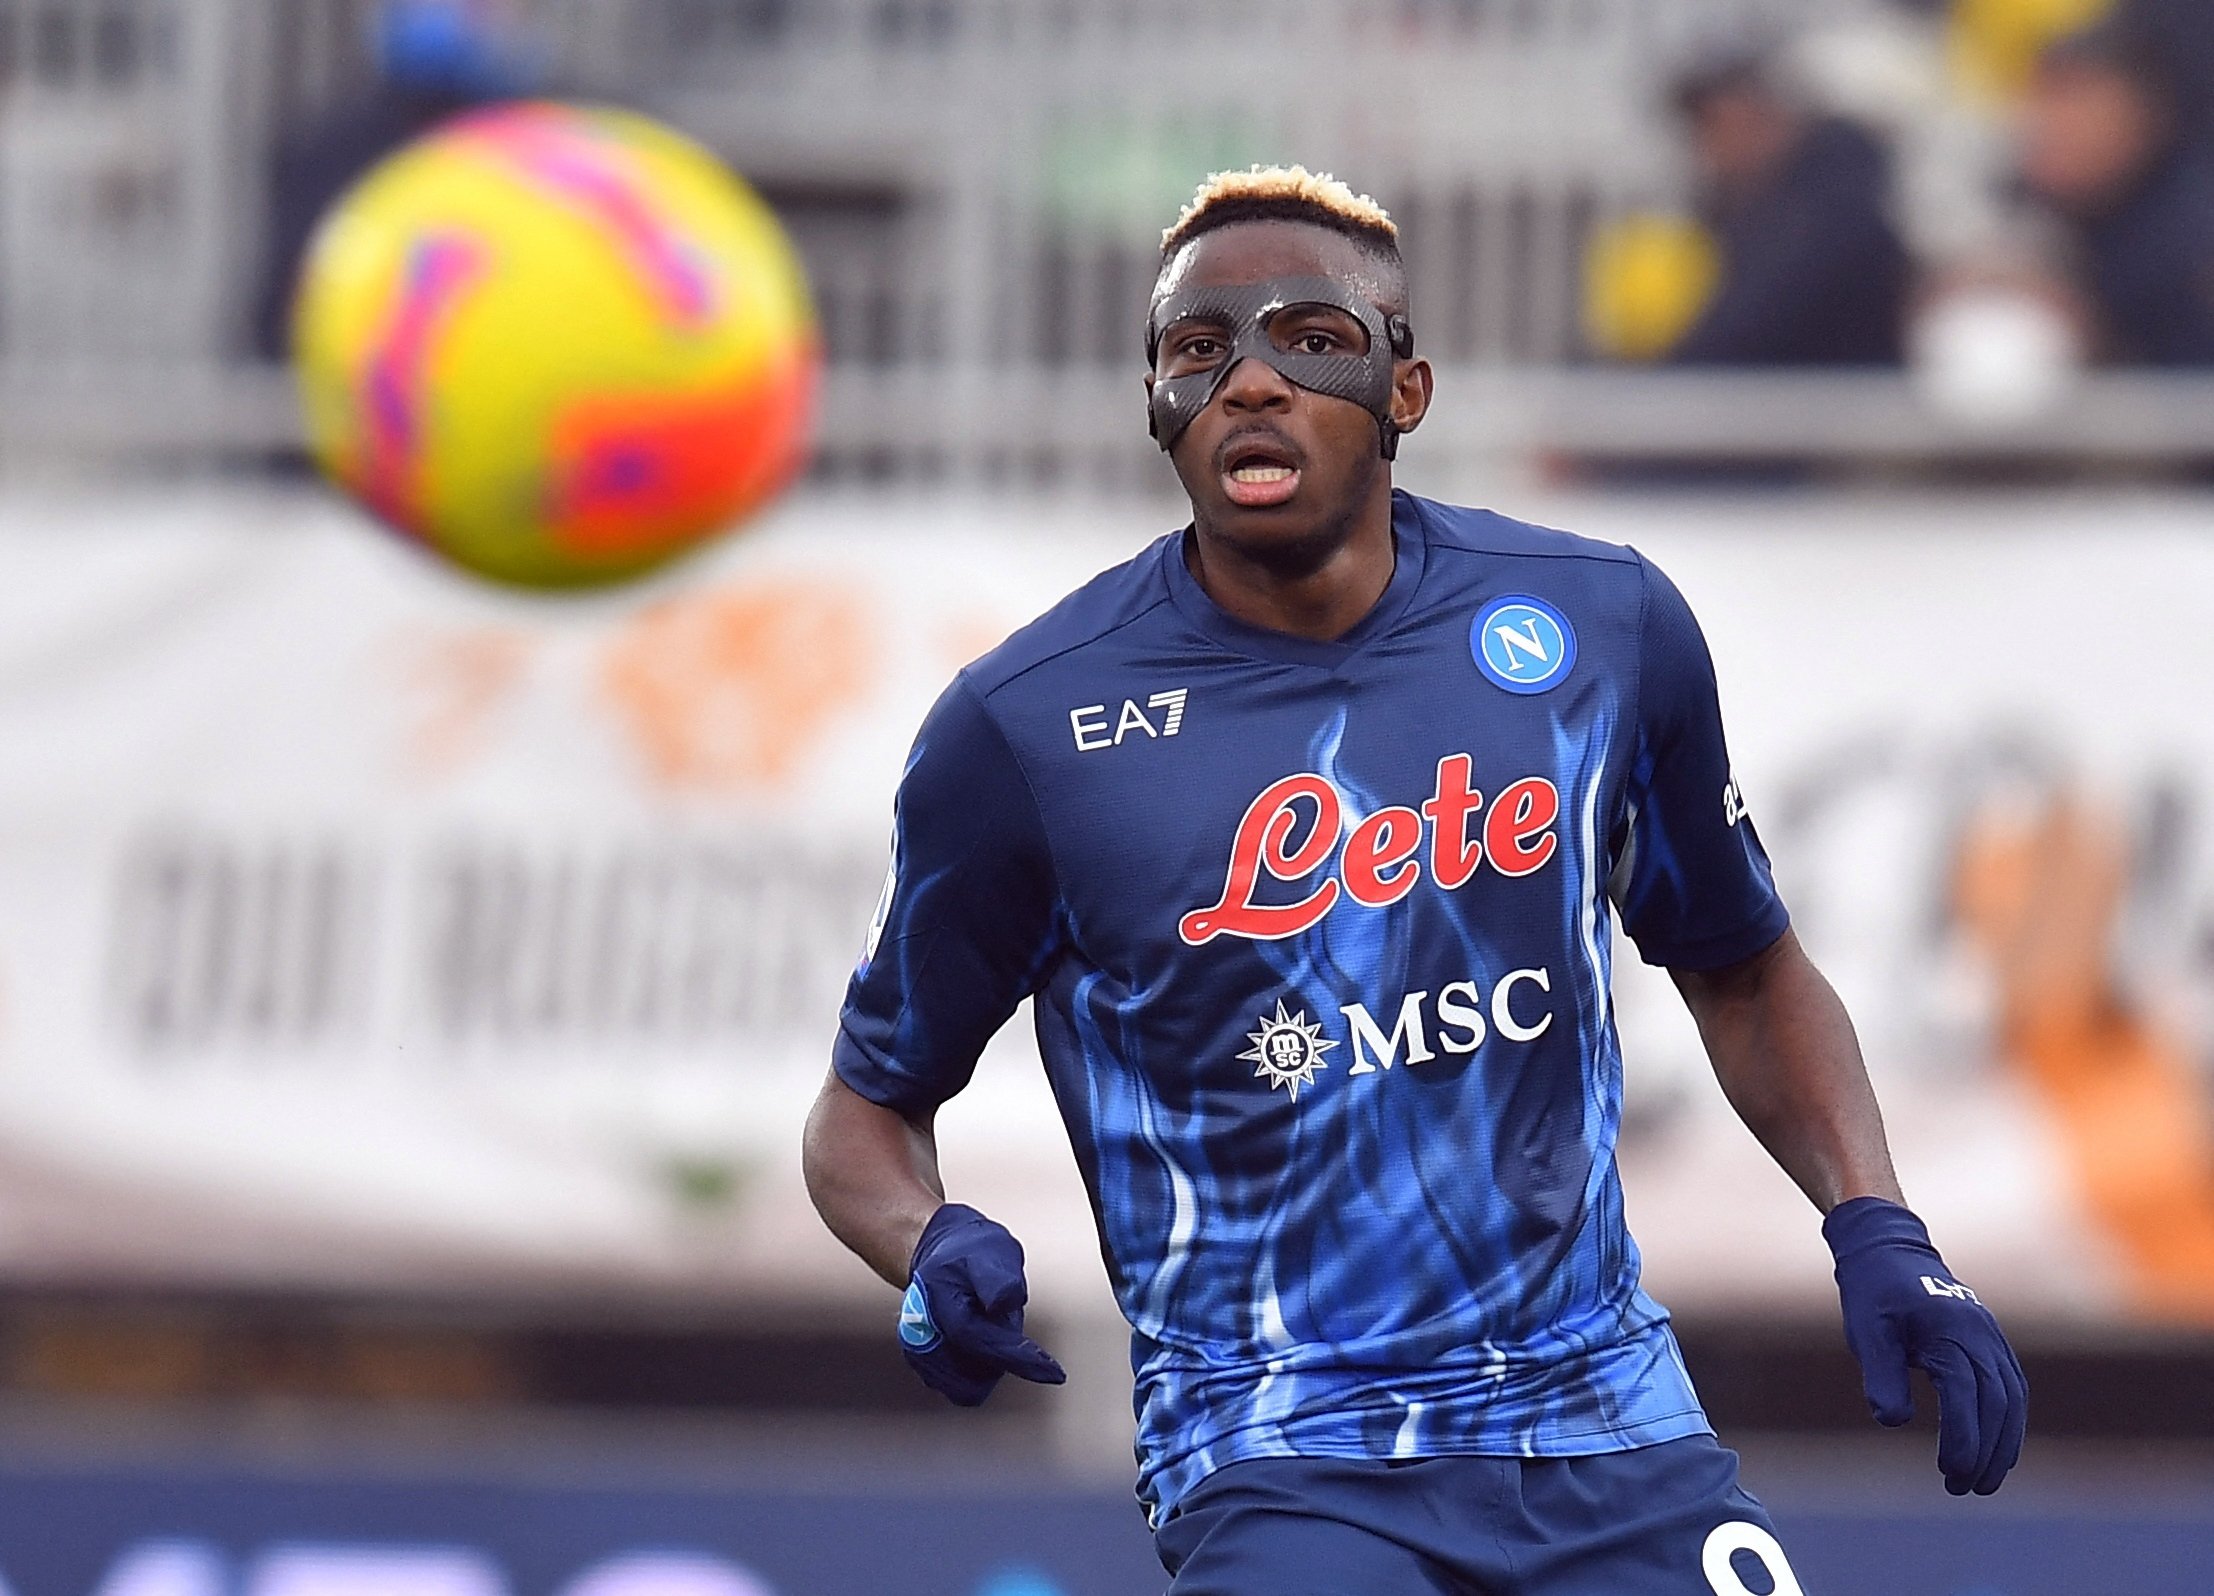 Napoli's Victor Osimhen in action during a Serie A match against Venezia, Venice, Italy, Feb. 6, 2022.